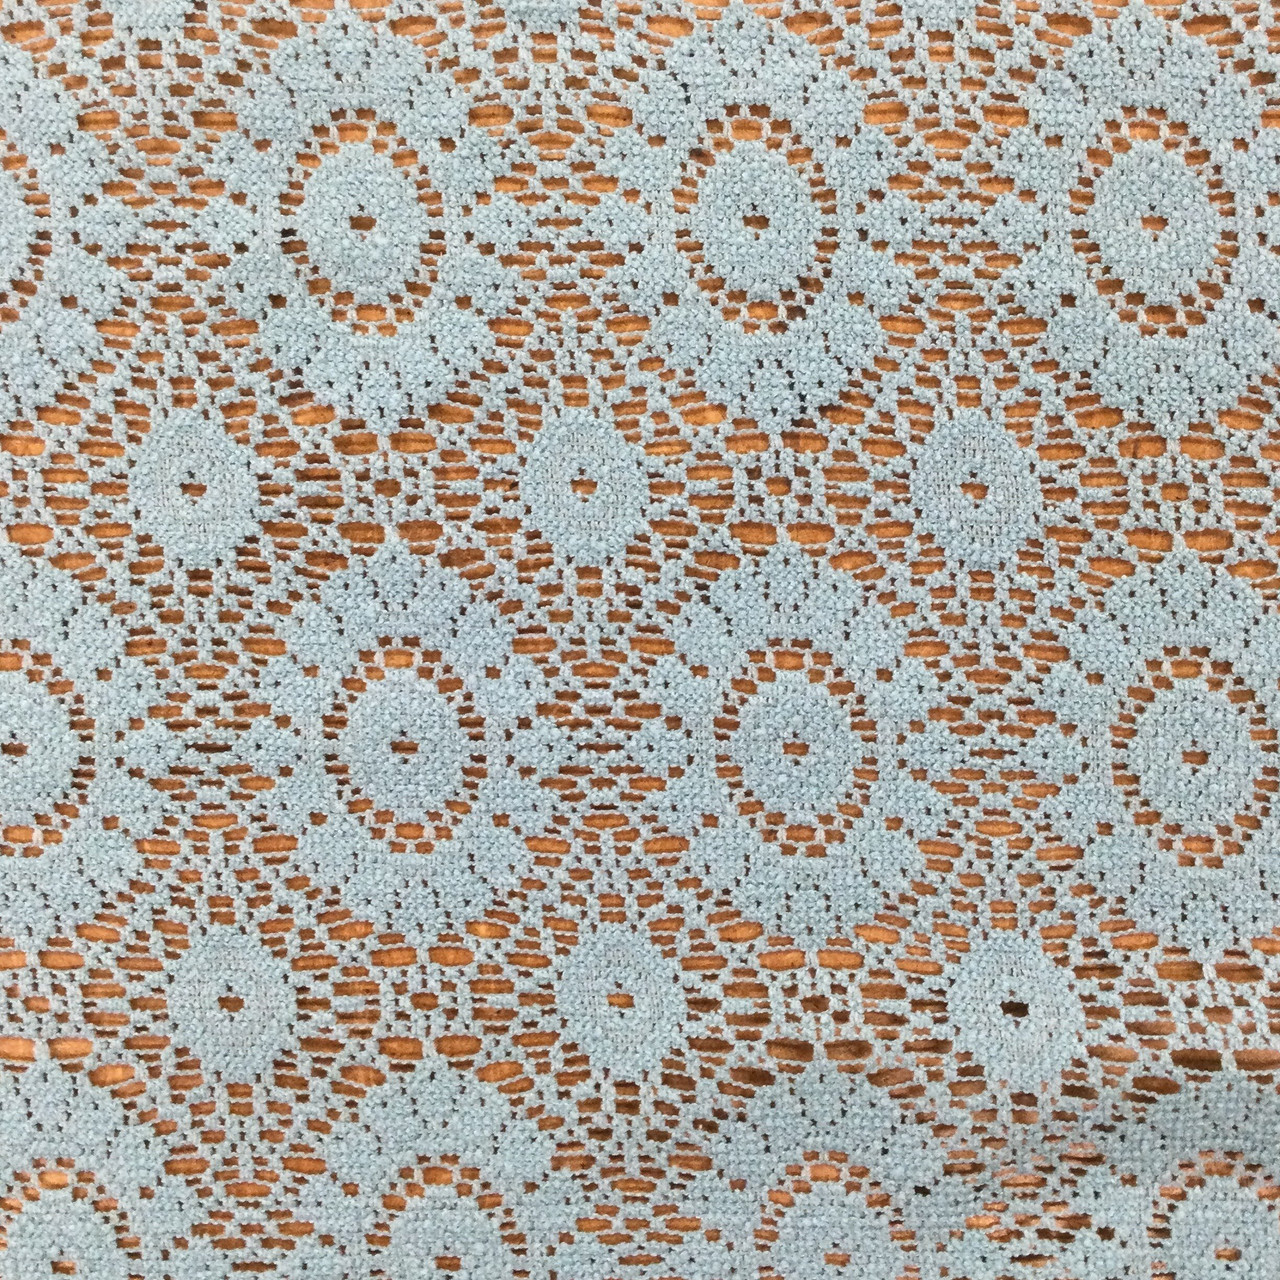 Light Teal Stretch Lace Fabric, Medallion Motif, Cotton\Poly, Clothing  and Apparel, 60 inch Wide